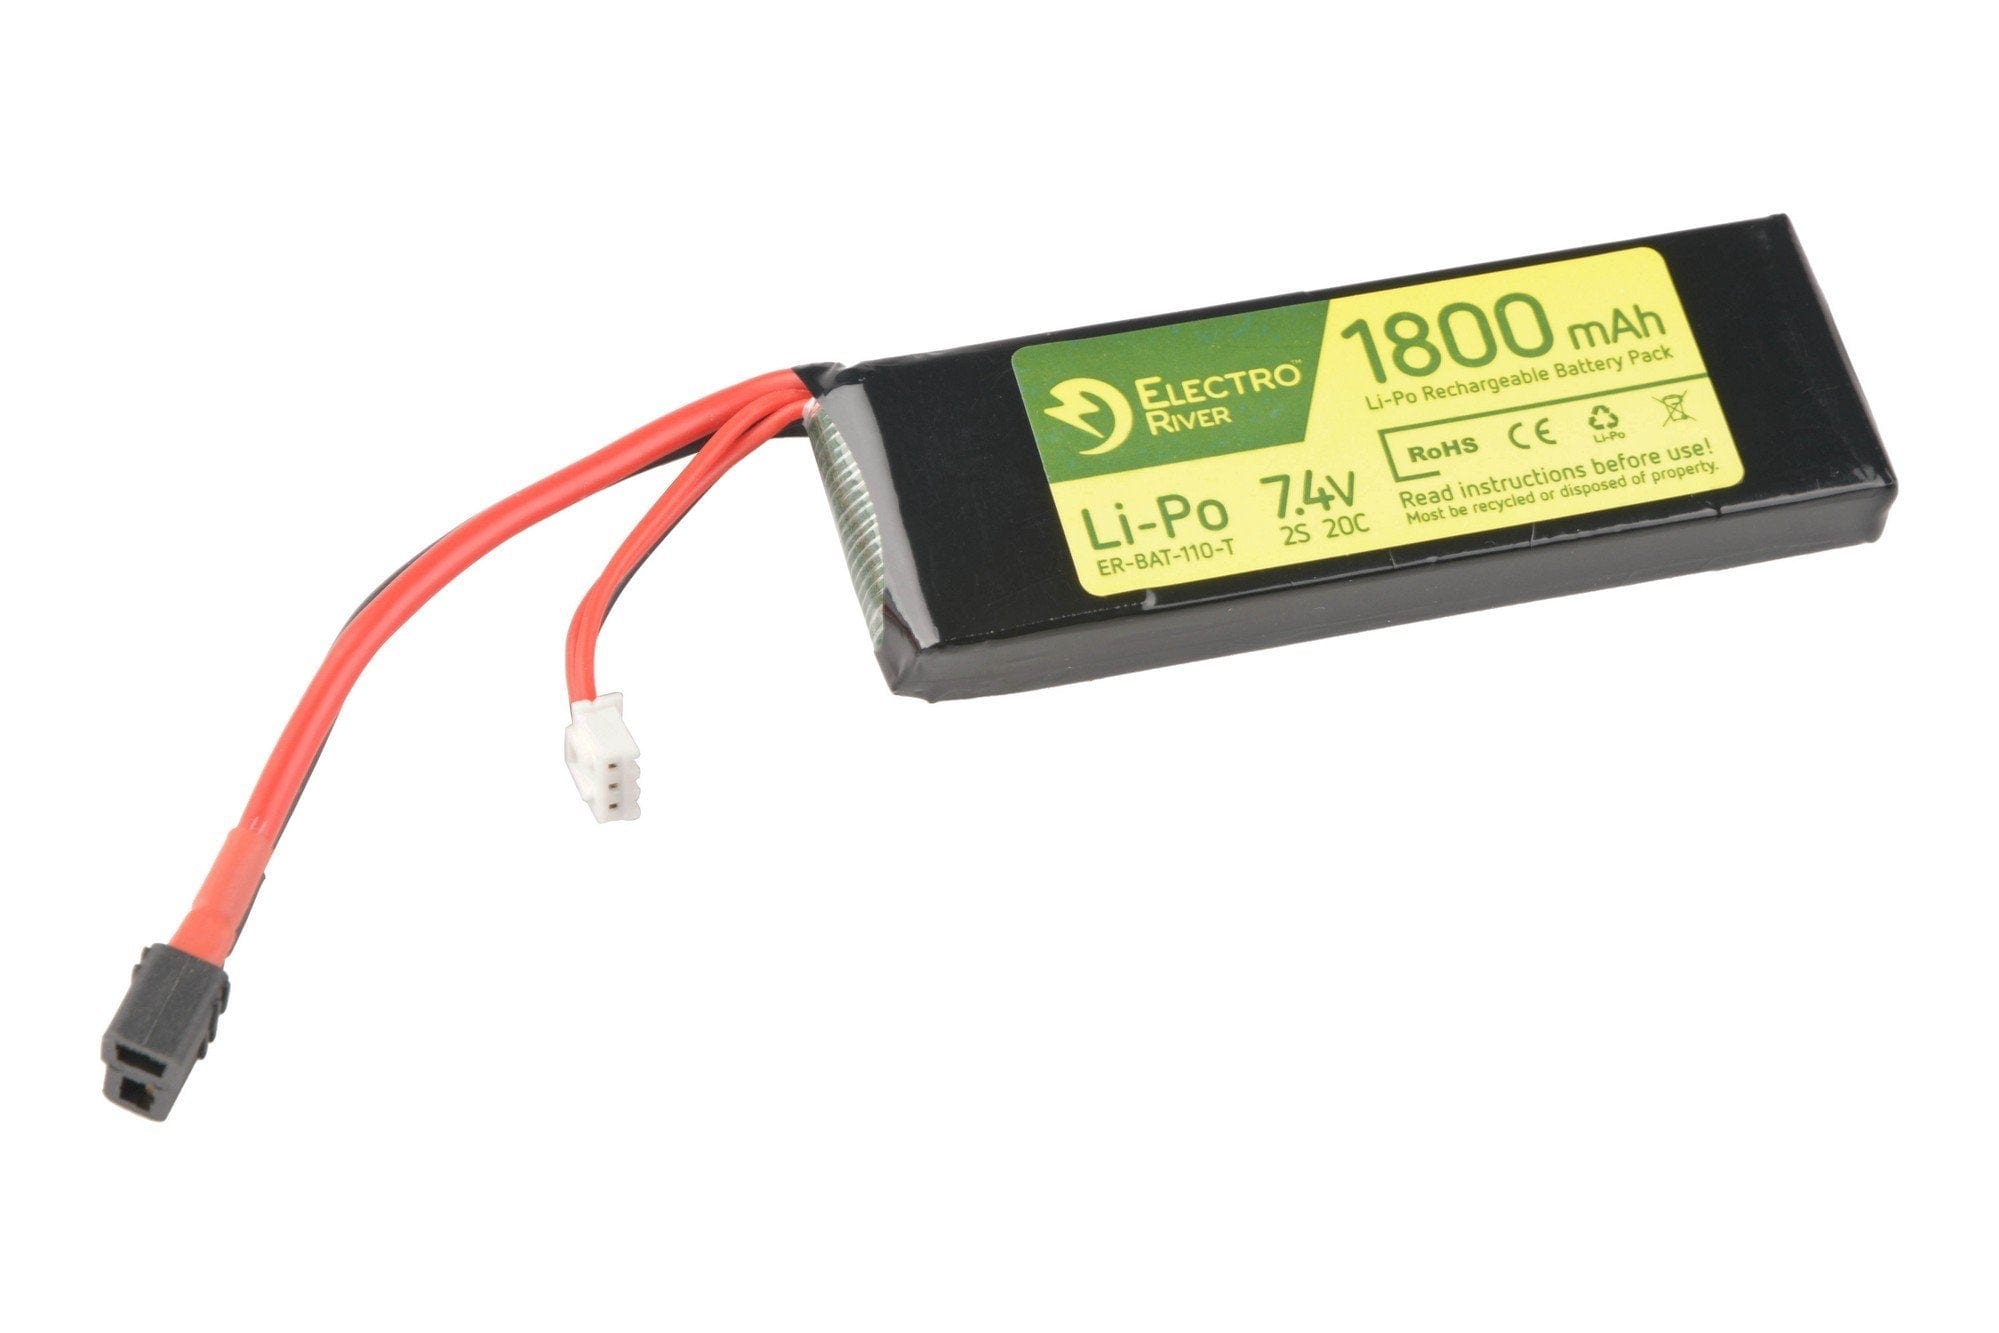 LiPo 7,4V 1800mAh 20/40C T-connect (DEANS) Battery by Electro River on Airsoft Mania Europe